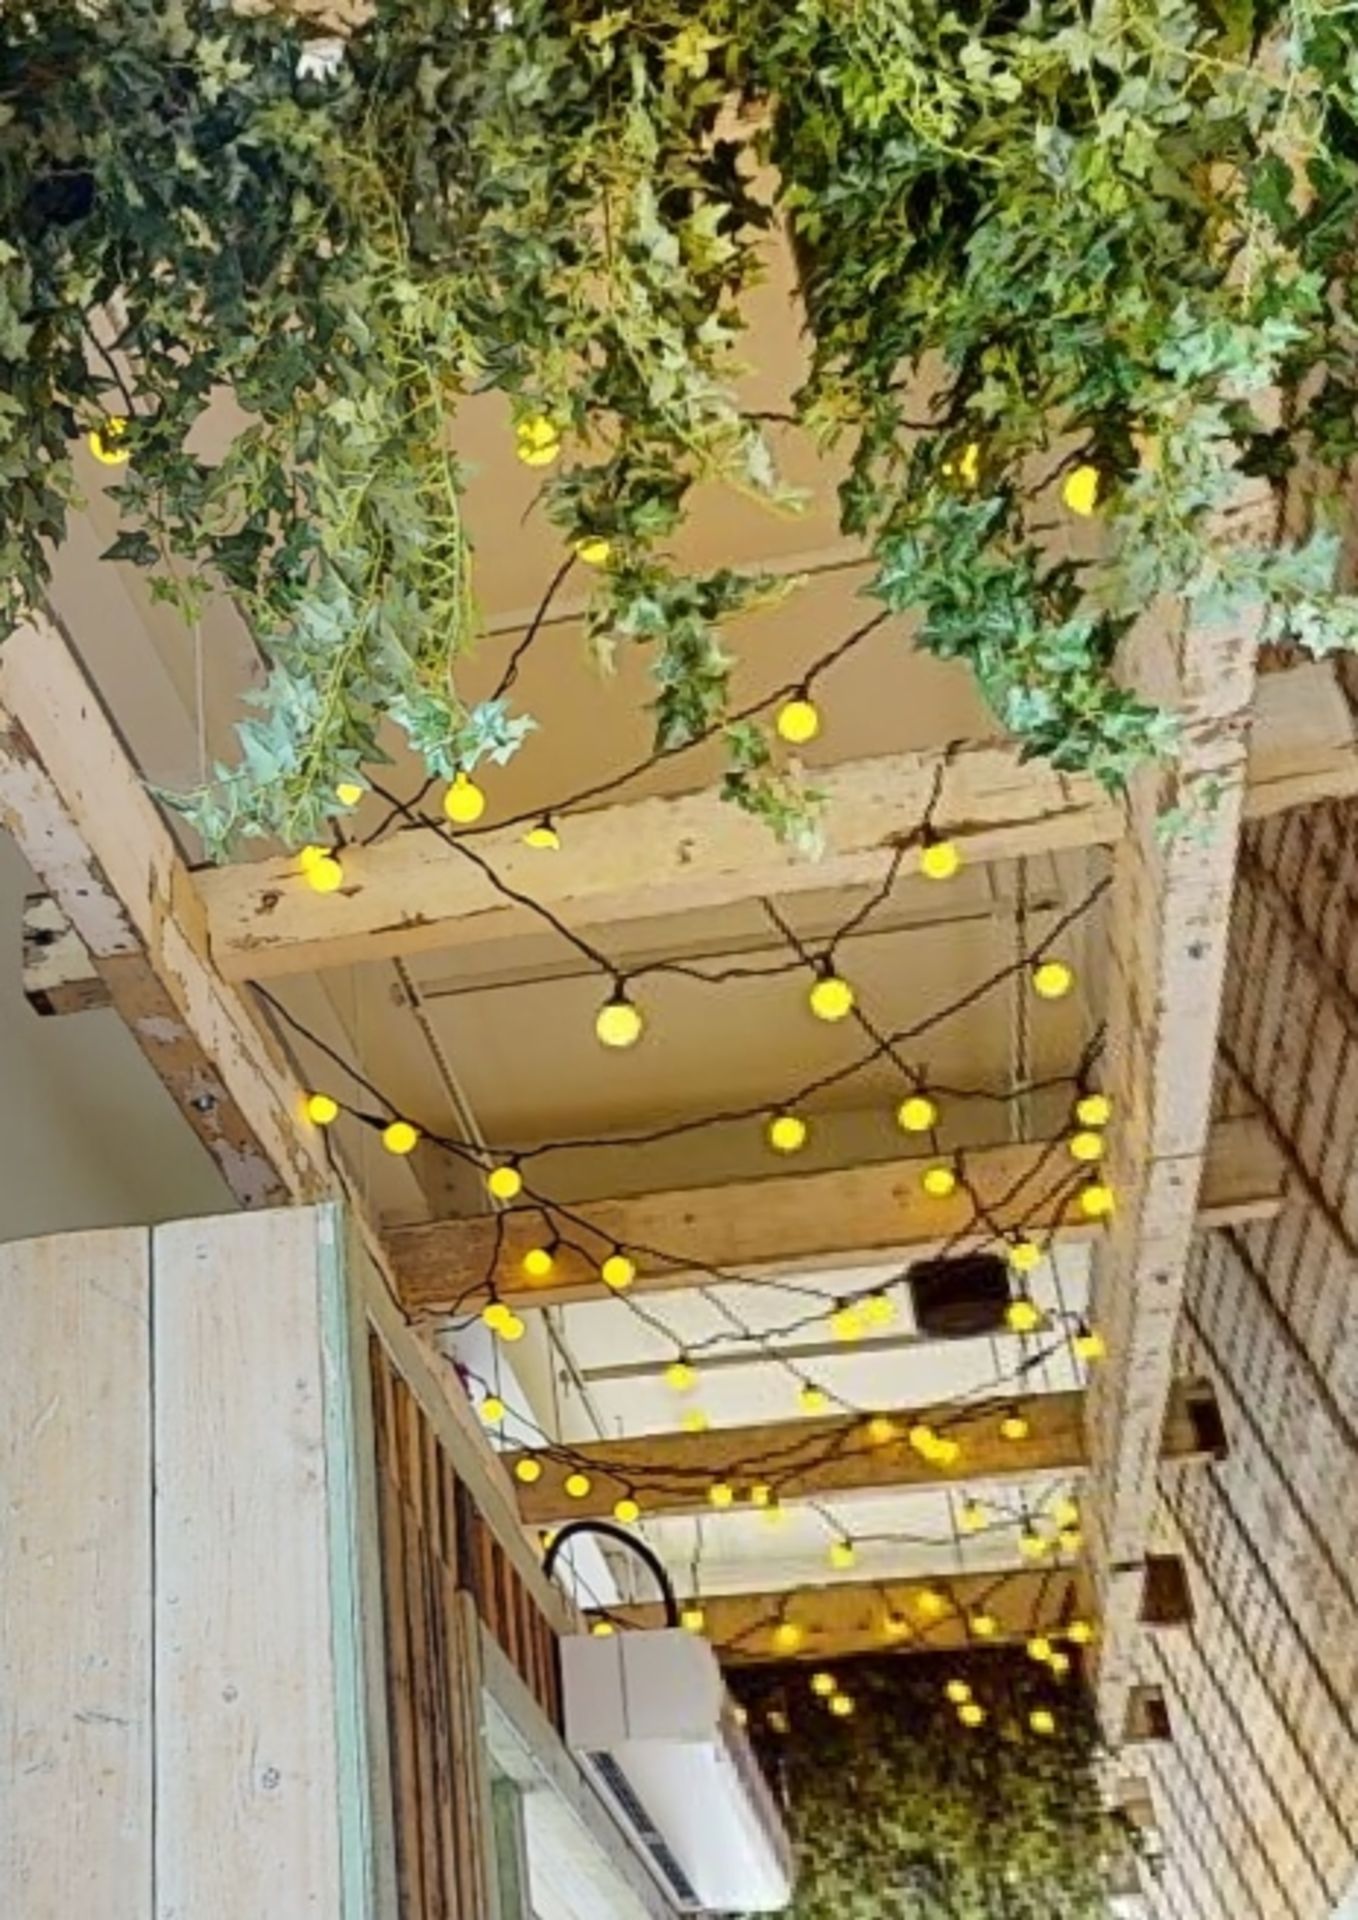 1 x Suspended Wooden Trellis With Artificial Foliage, Spotlights, String Lights and Hanging Brackets - Image 4 of 4